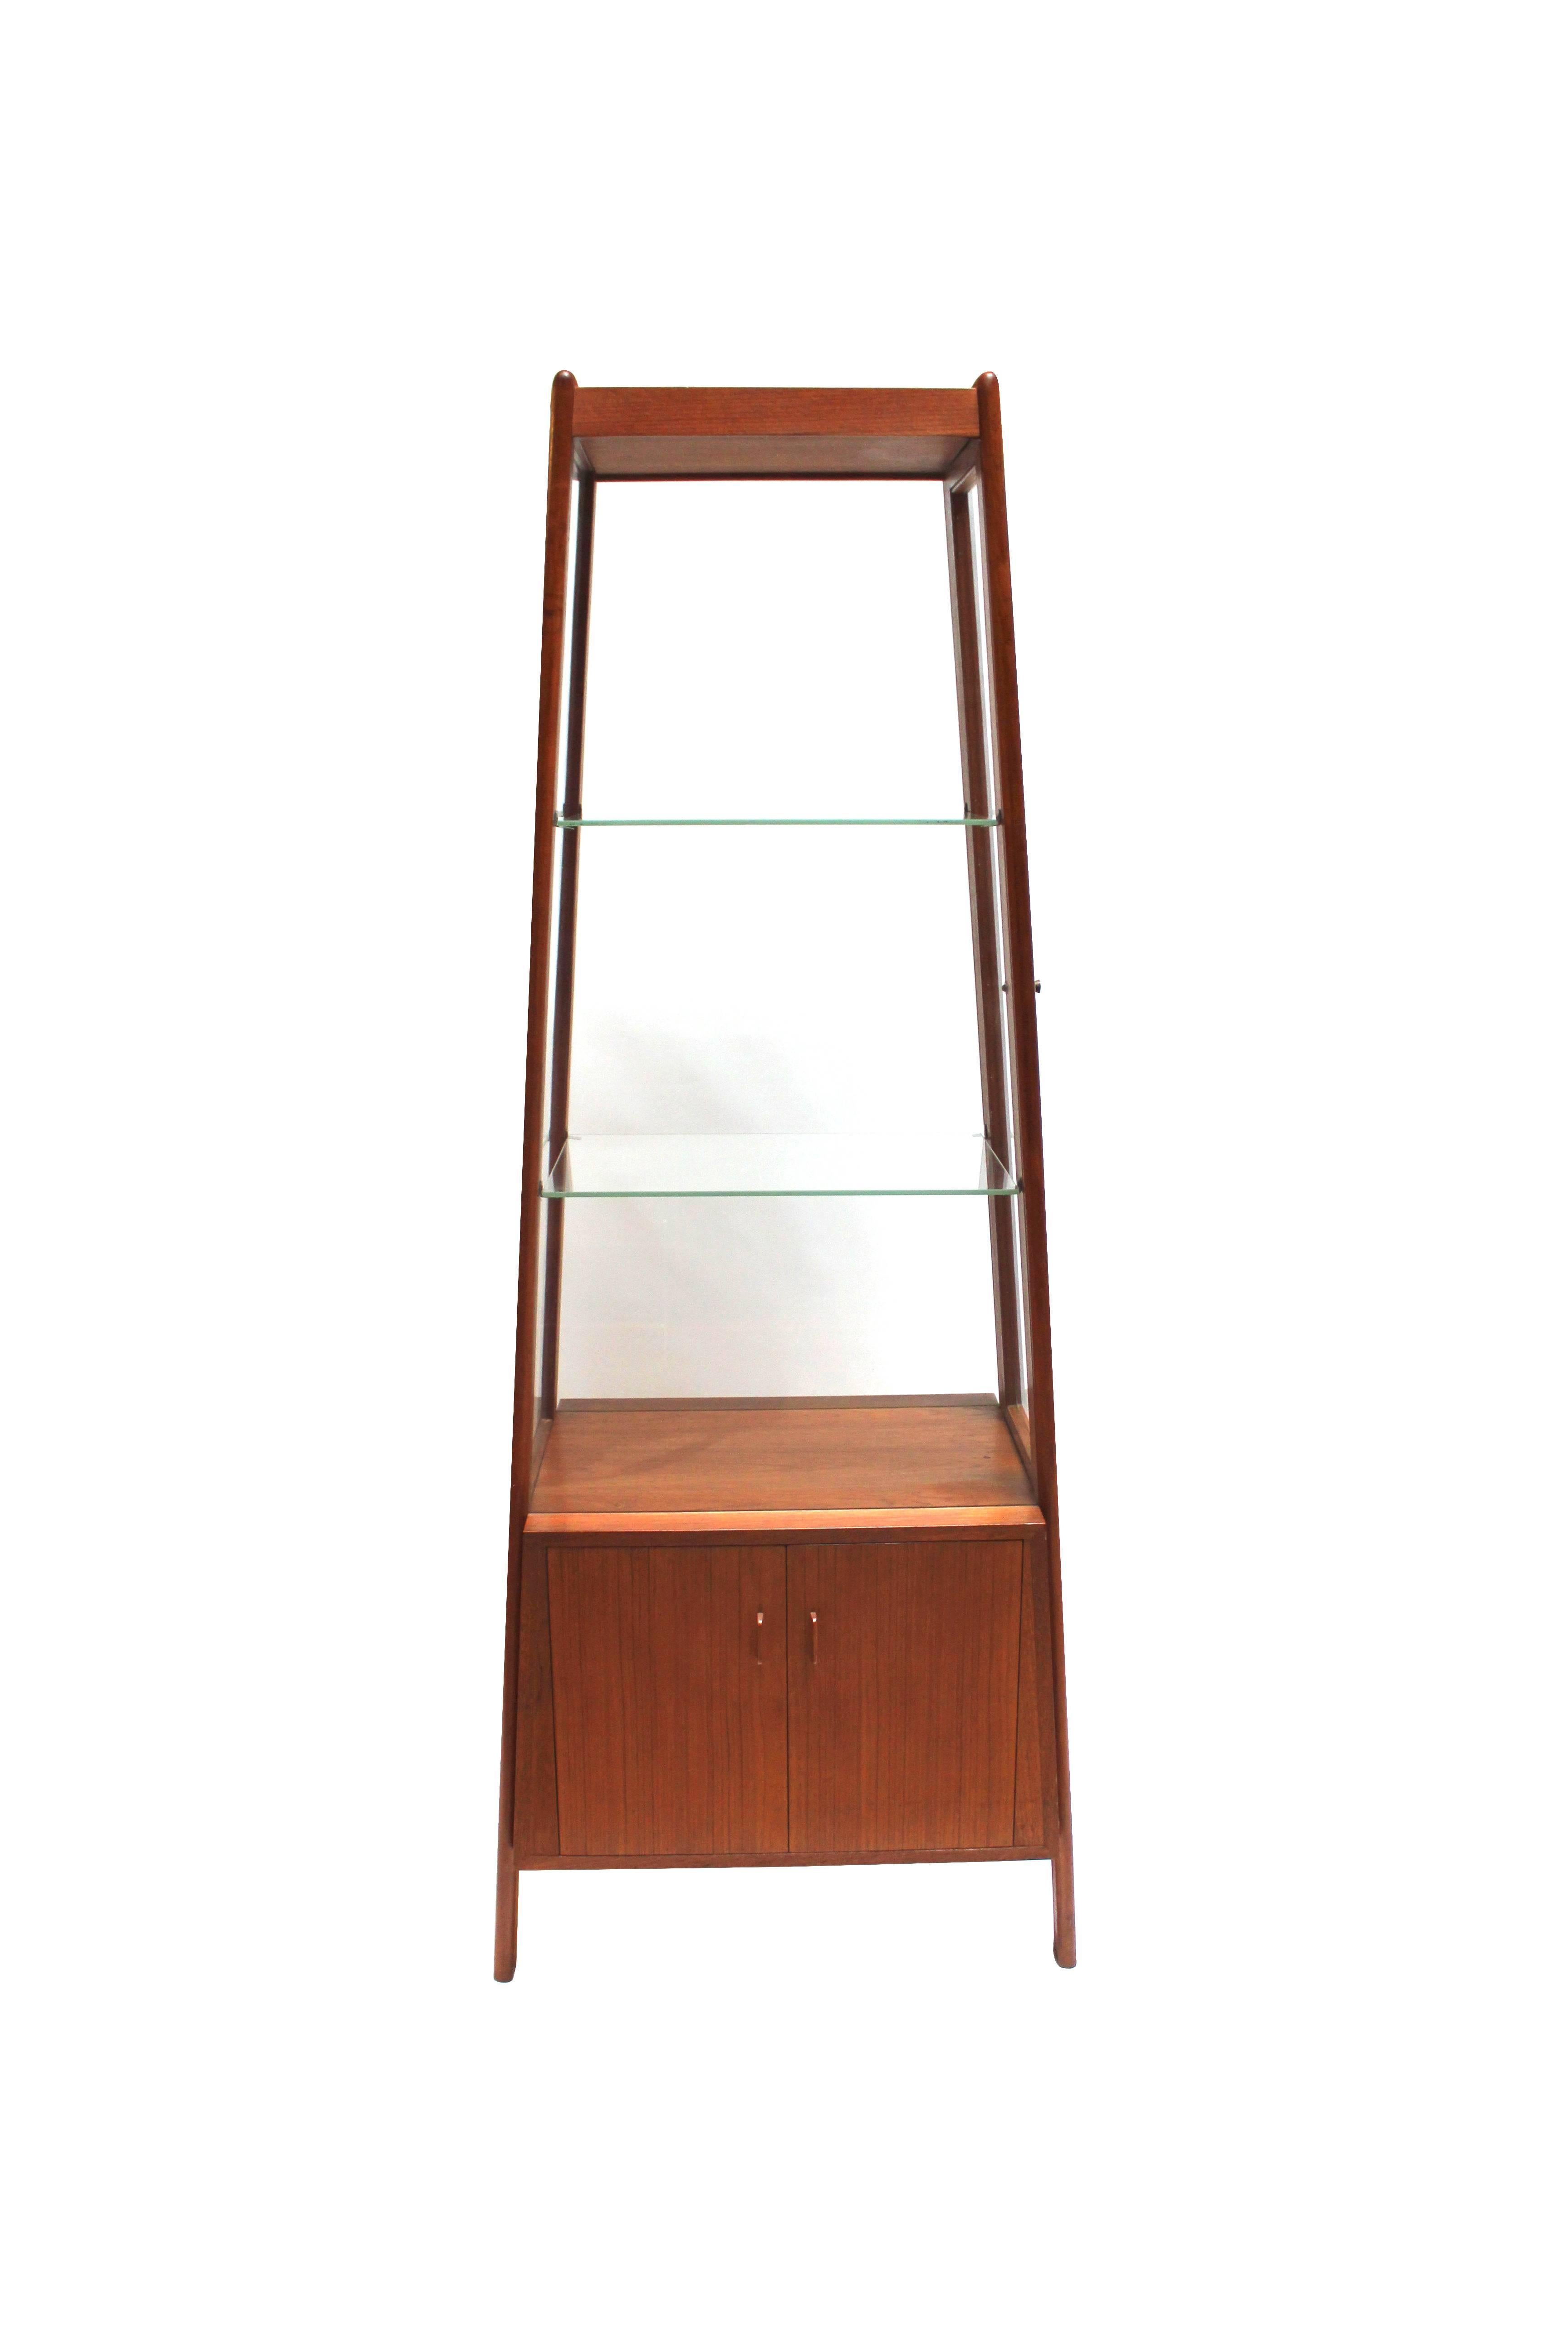 Rare 1950s Danish modern tapered teak and glass curio cabinet or vitrine designed by Hans Wegner with two glass shelves and storage in bottom unit. Most likely made as a special order.